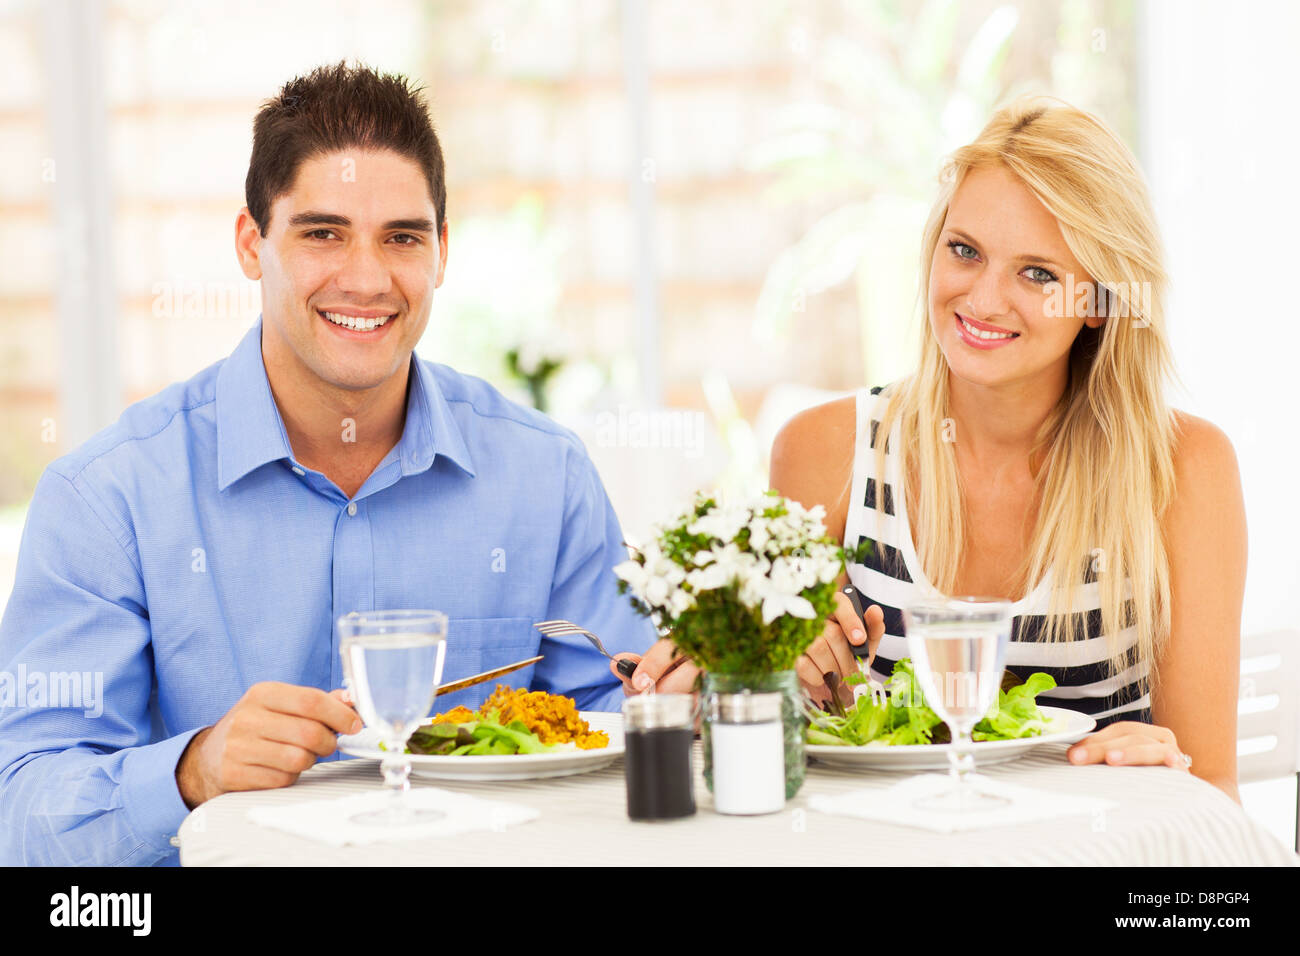 Young couple having lunch in restaurant Banque D'Images